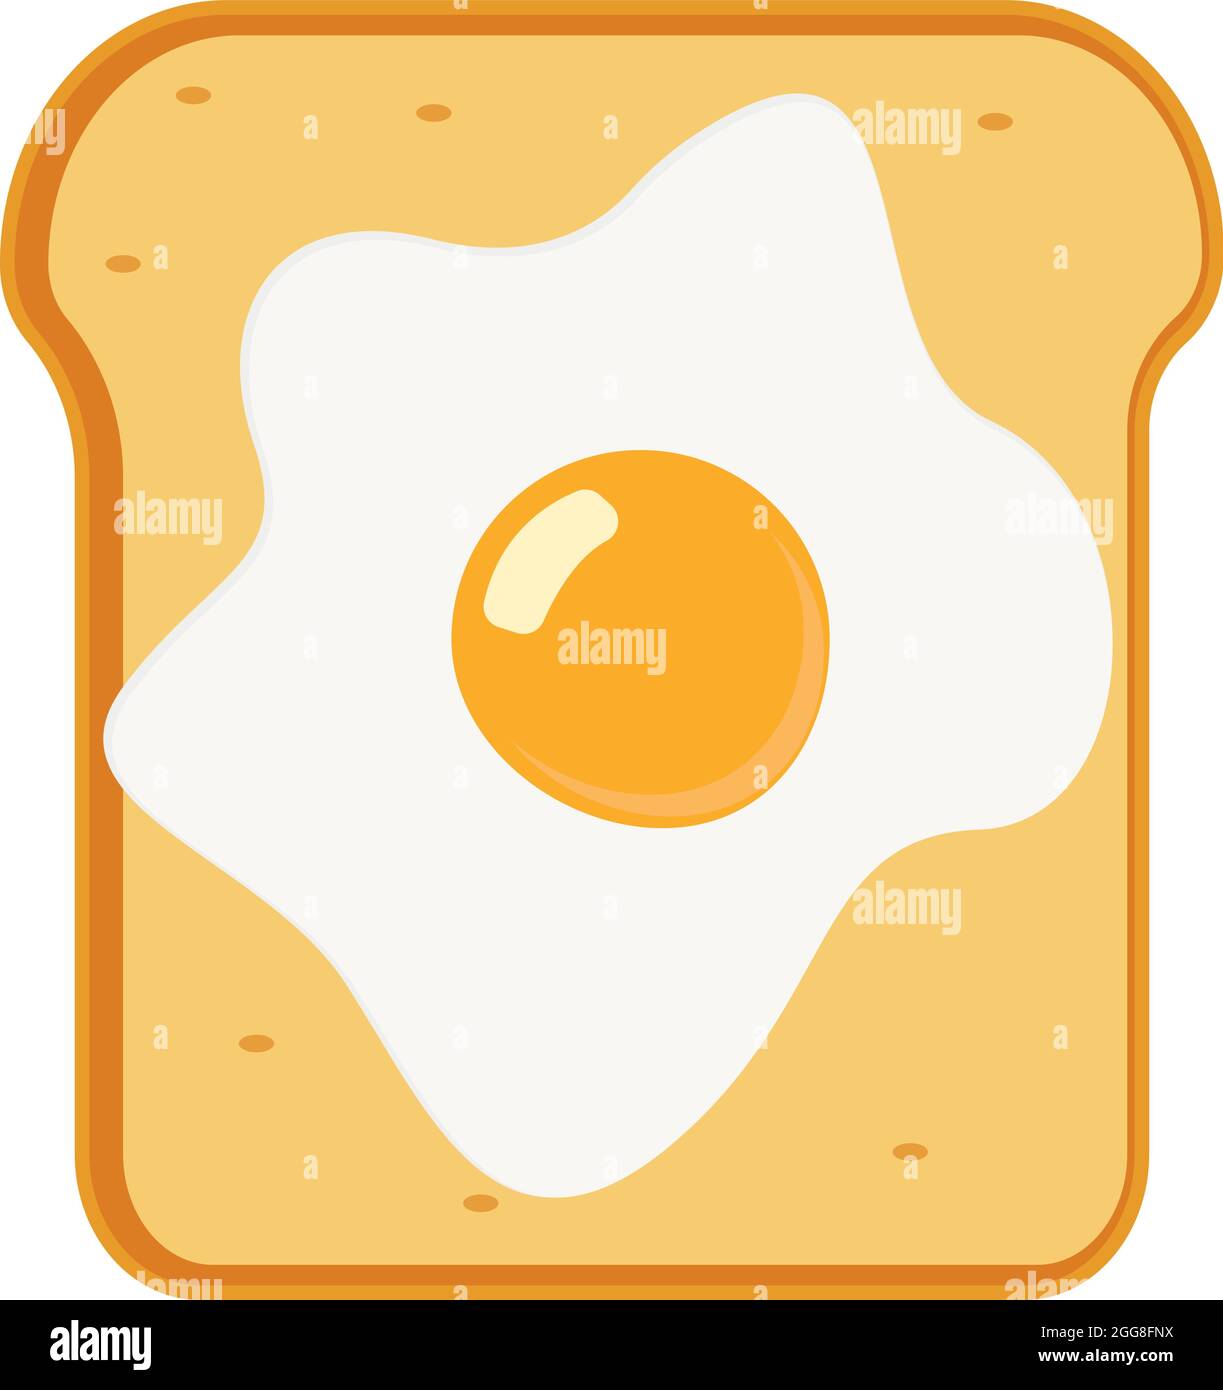 Toast with fried egg, illustration, vector on a white background Stock Vector